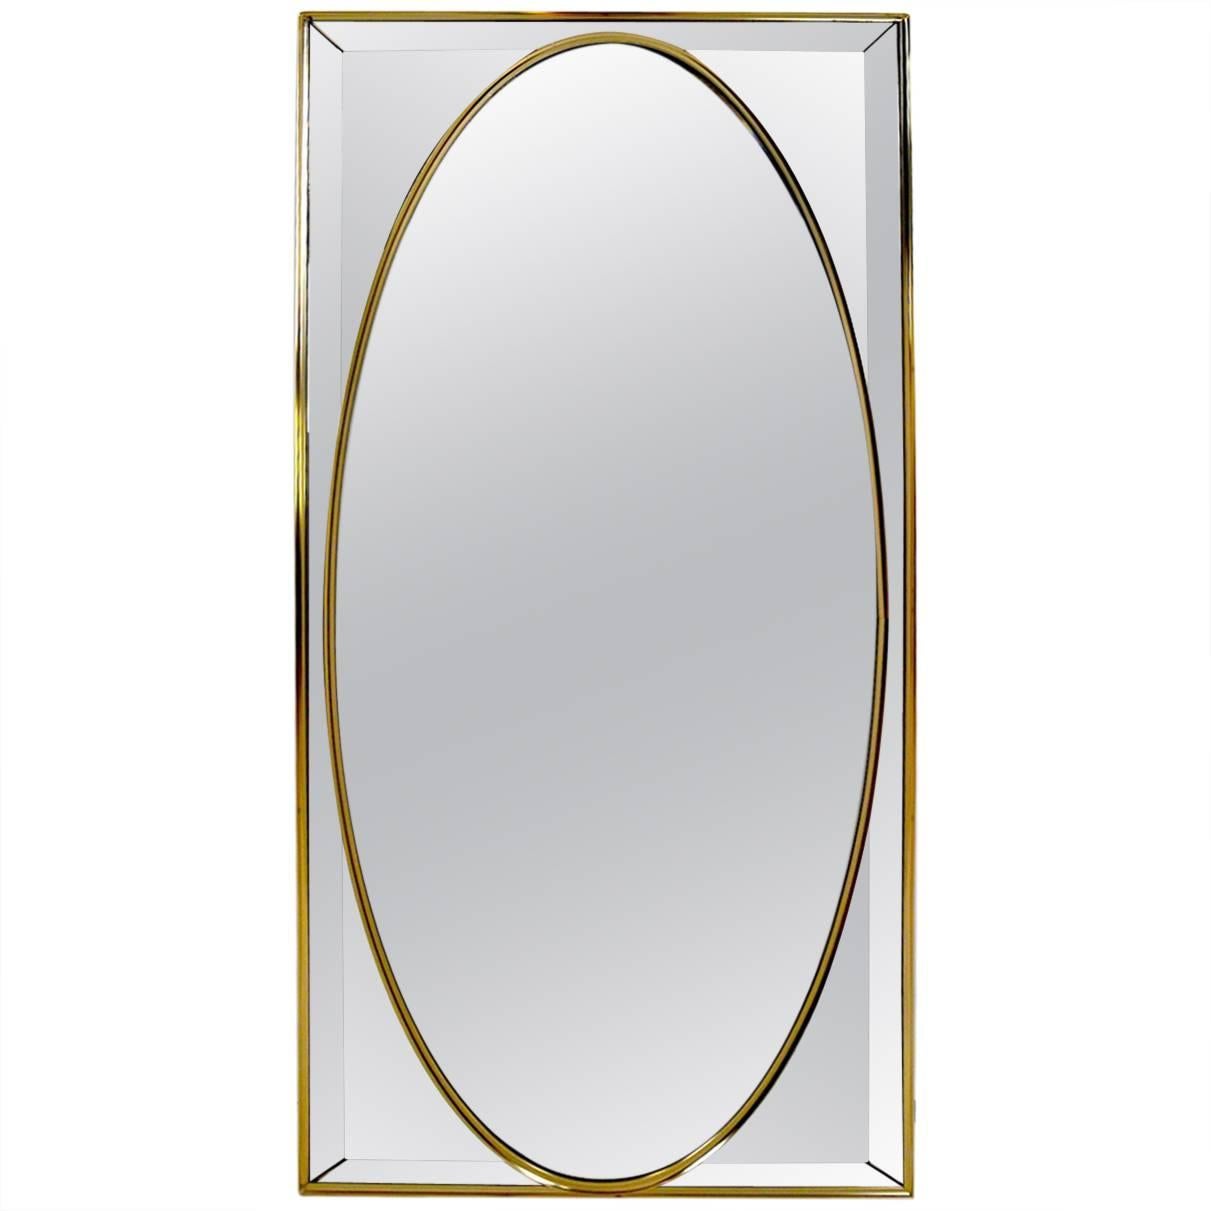 Decorative Mirror on Mirror Attributed to Labarge